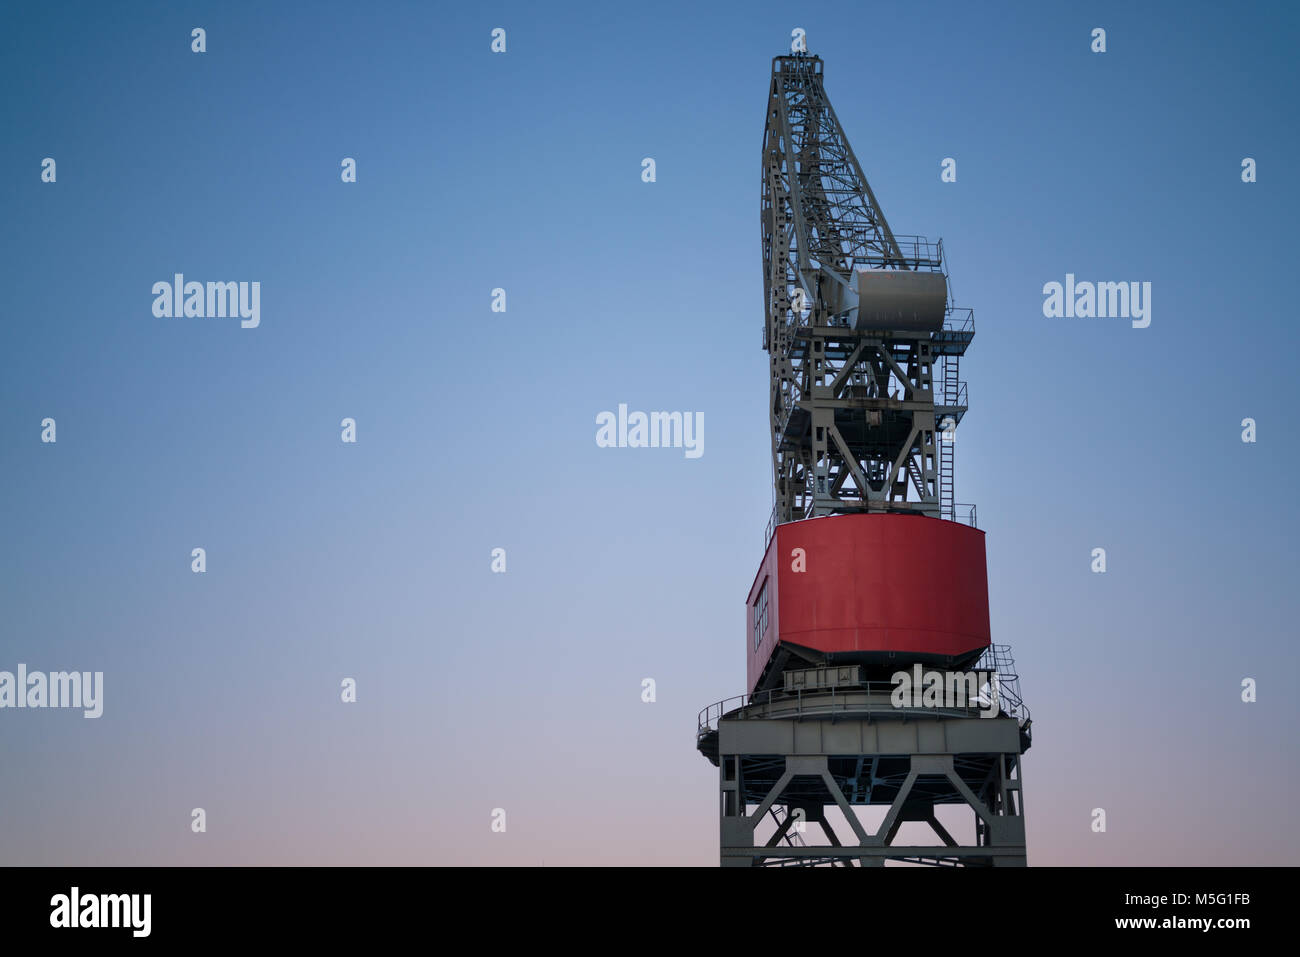 Isolated tower crane against blue sky Stock Photo